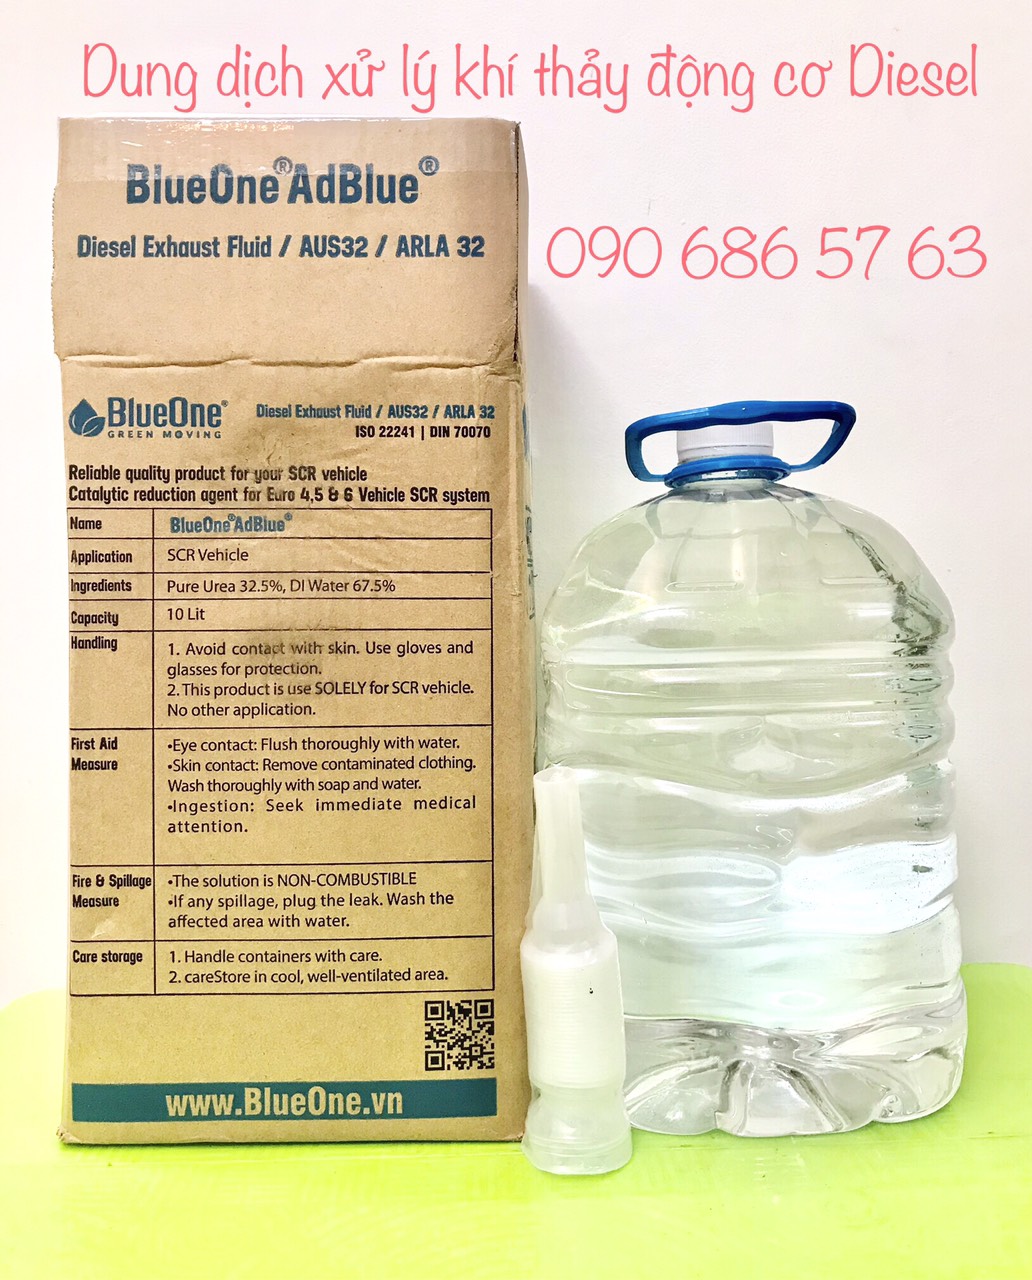 dung dich adblue can 10L